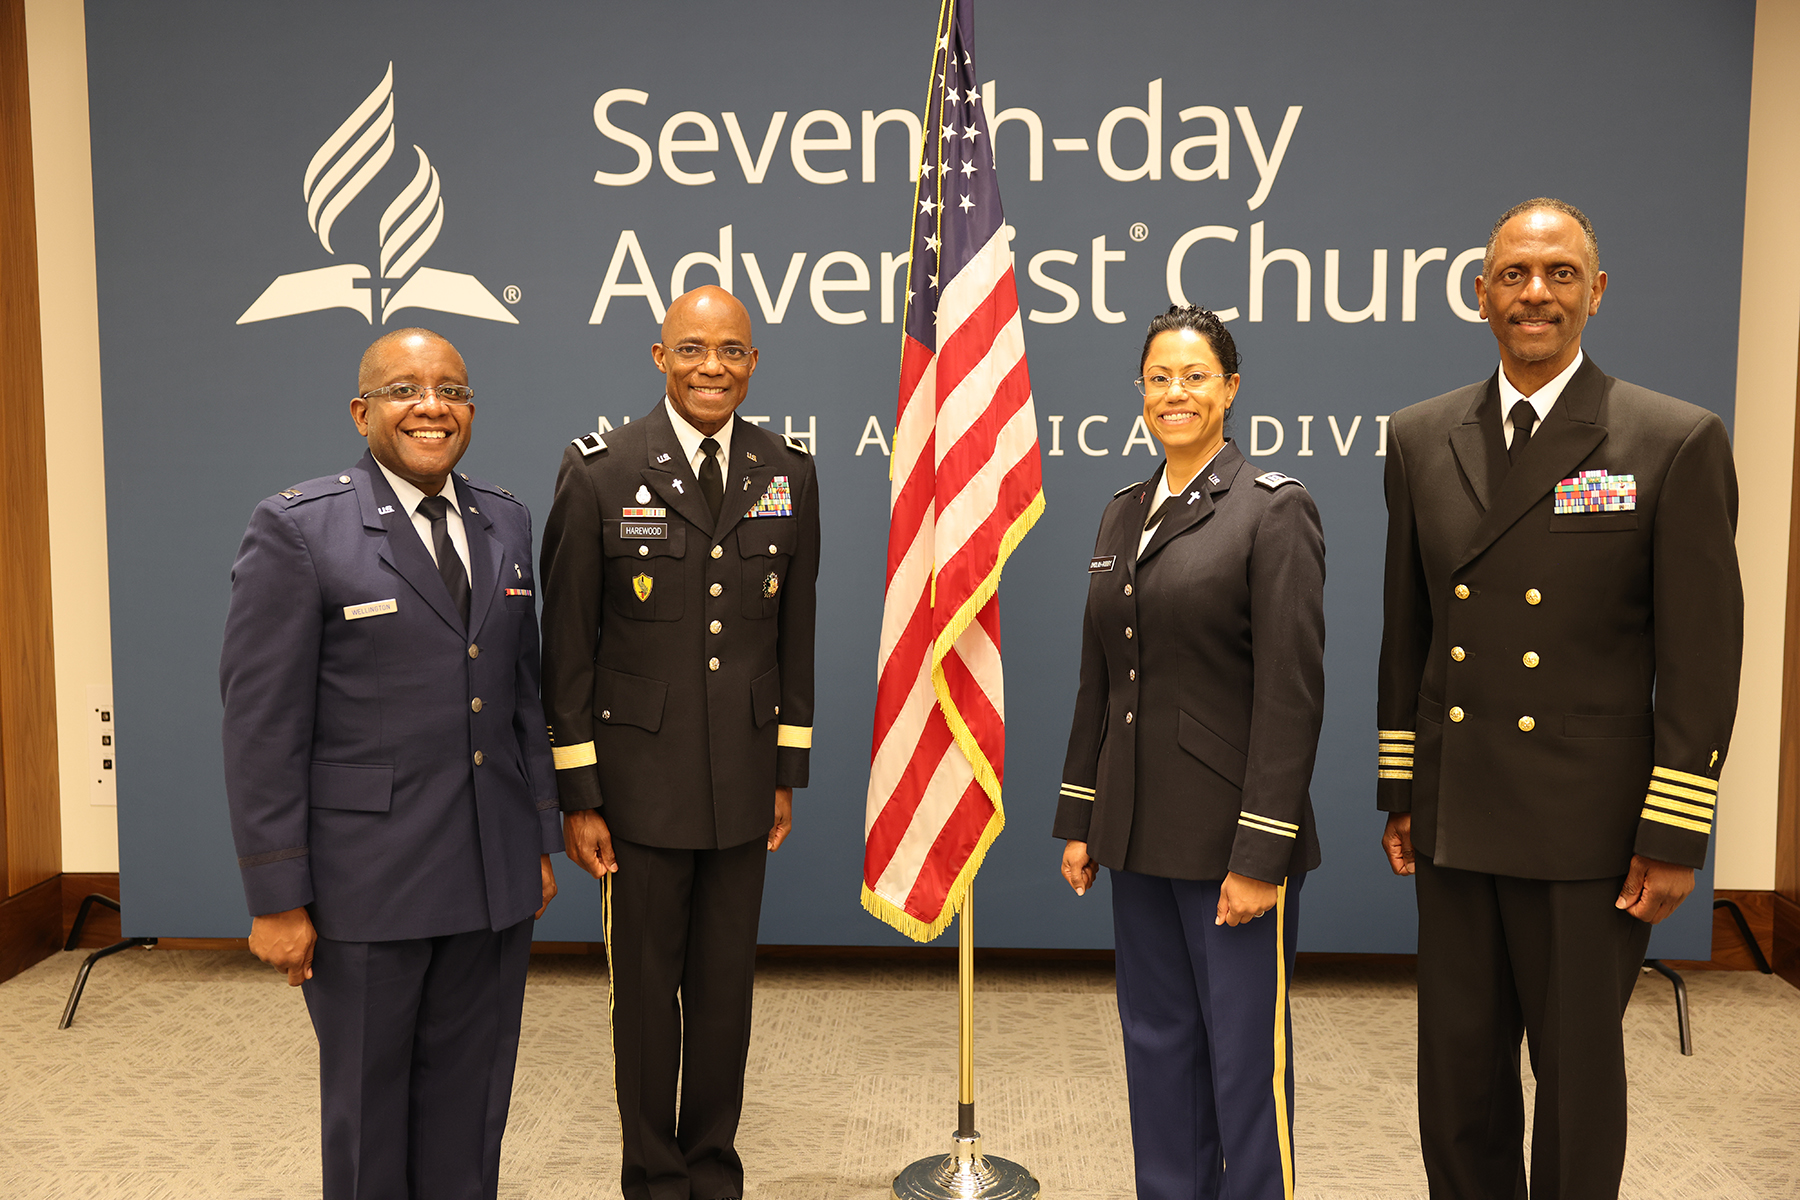 Four smiling individuals in military uniform with a U.S. flag in the middle of them; two black men, a woman with tanned skin, and another black man.